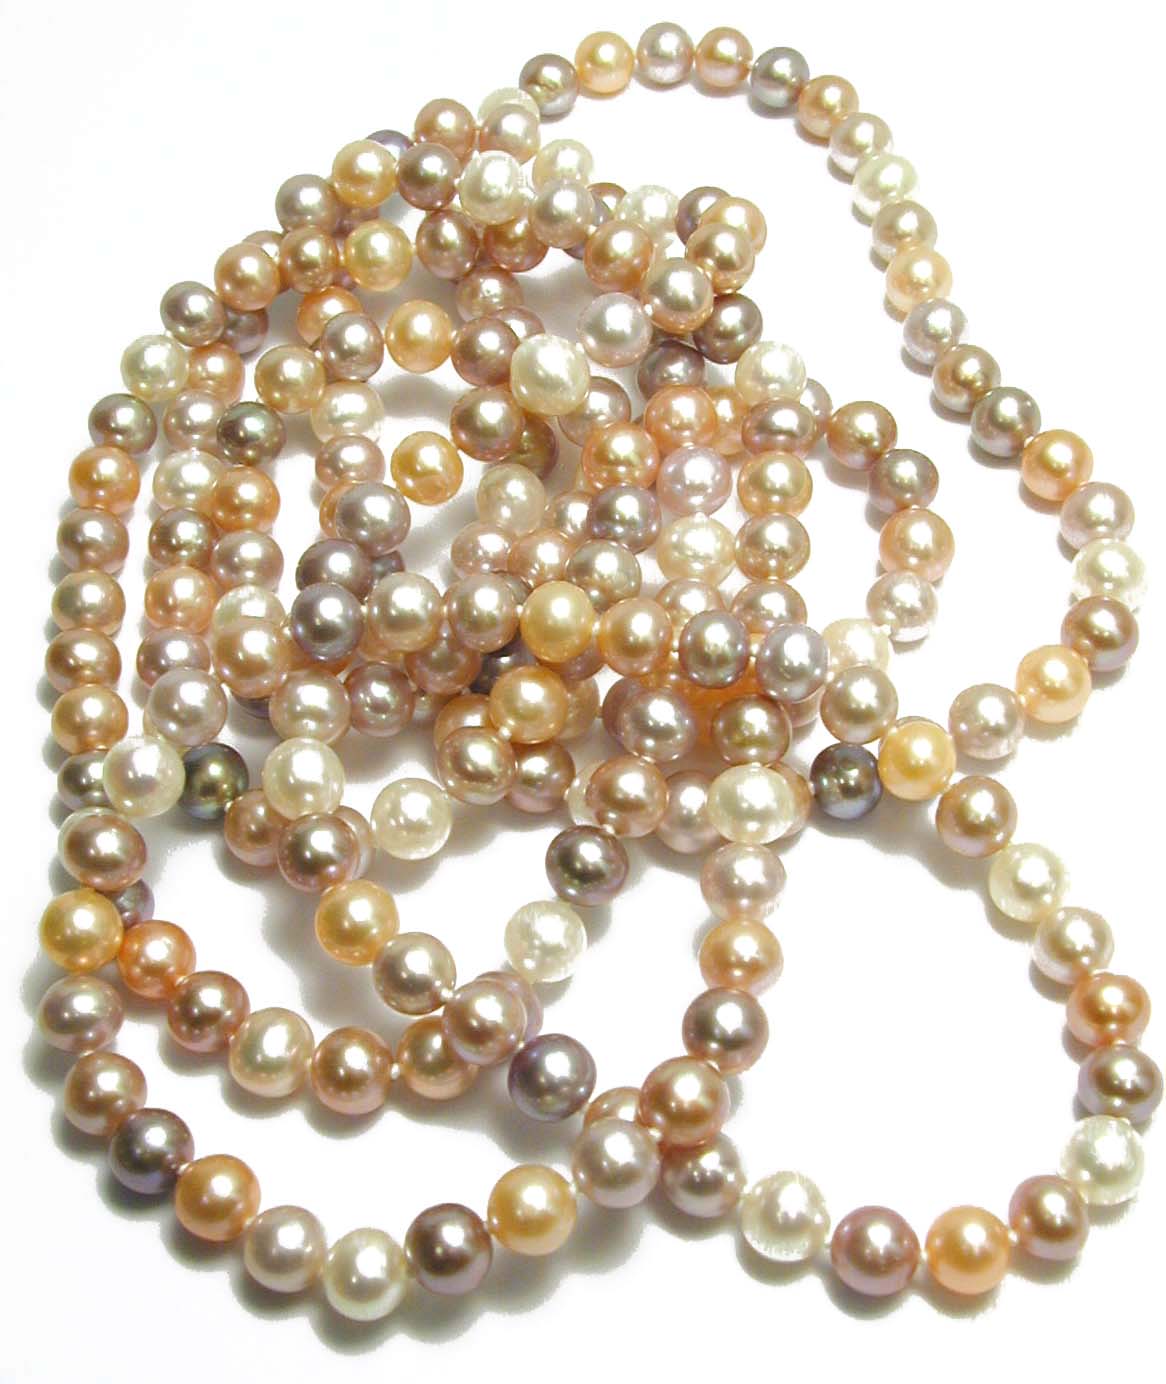 
60 Inch Multicolored Freshwater Cultured Pearl Strand
